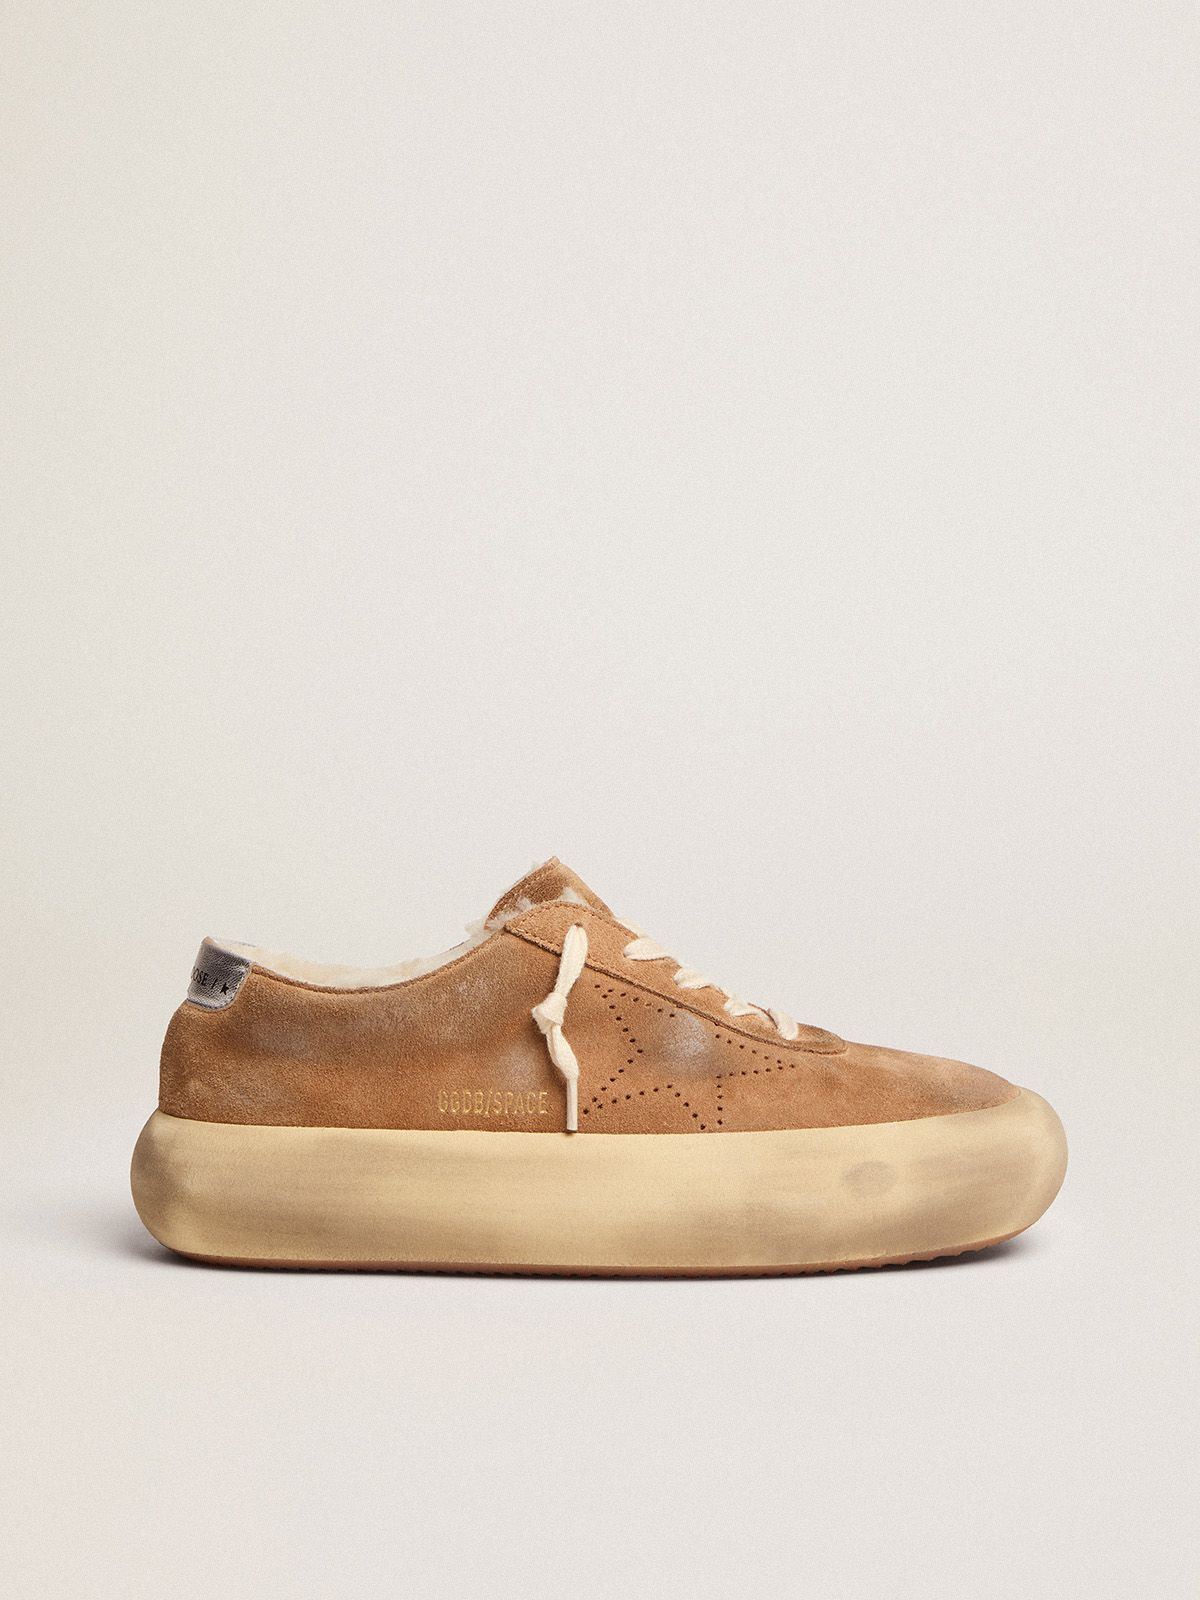 Golden Goose Saldi Space-Star shoes in tobacco-colored suede with shearling lining